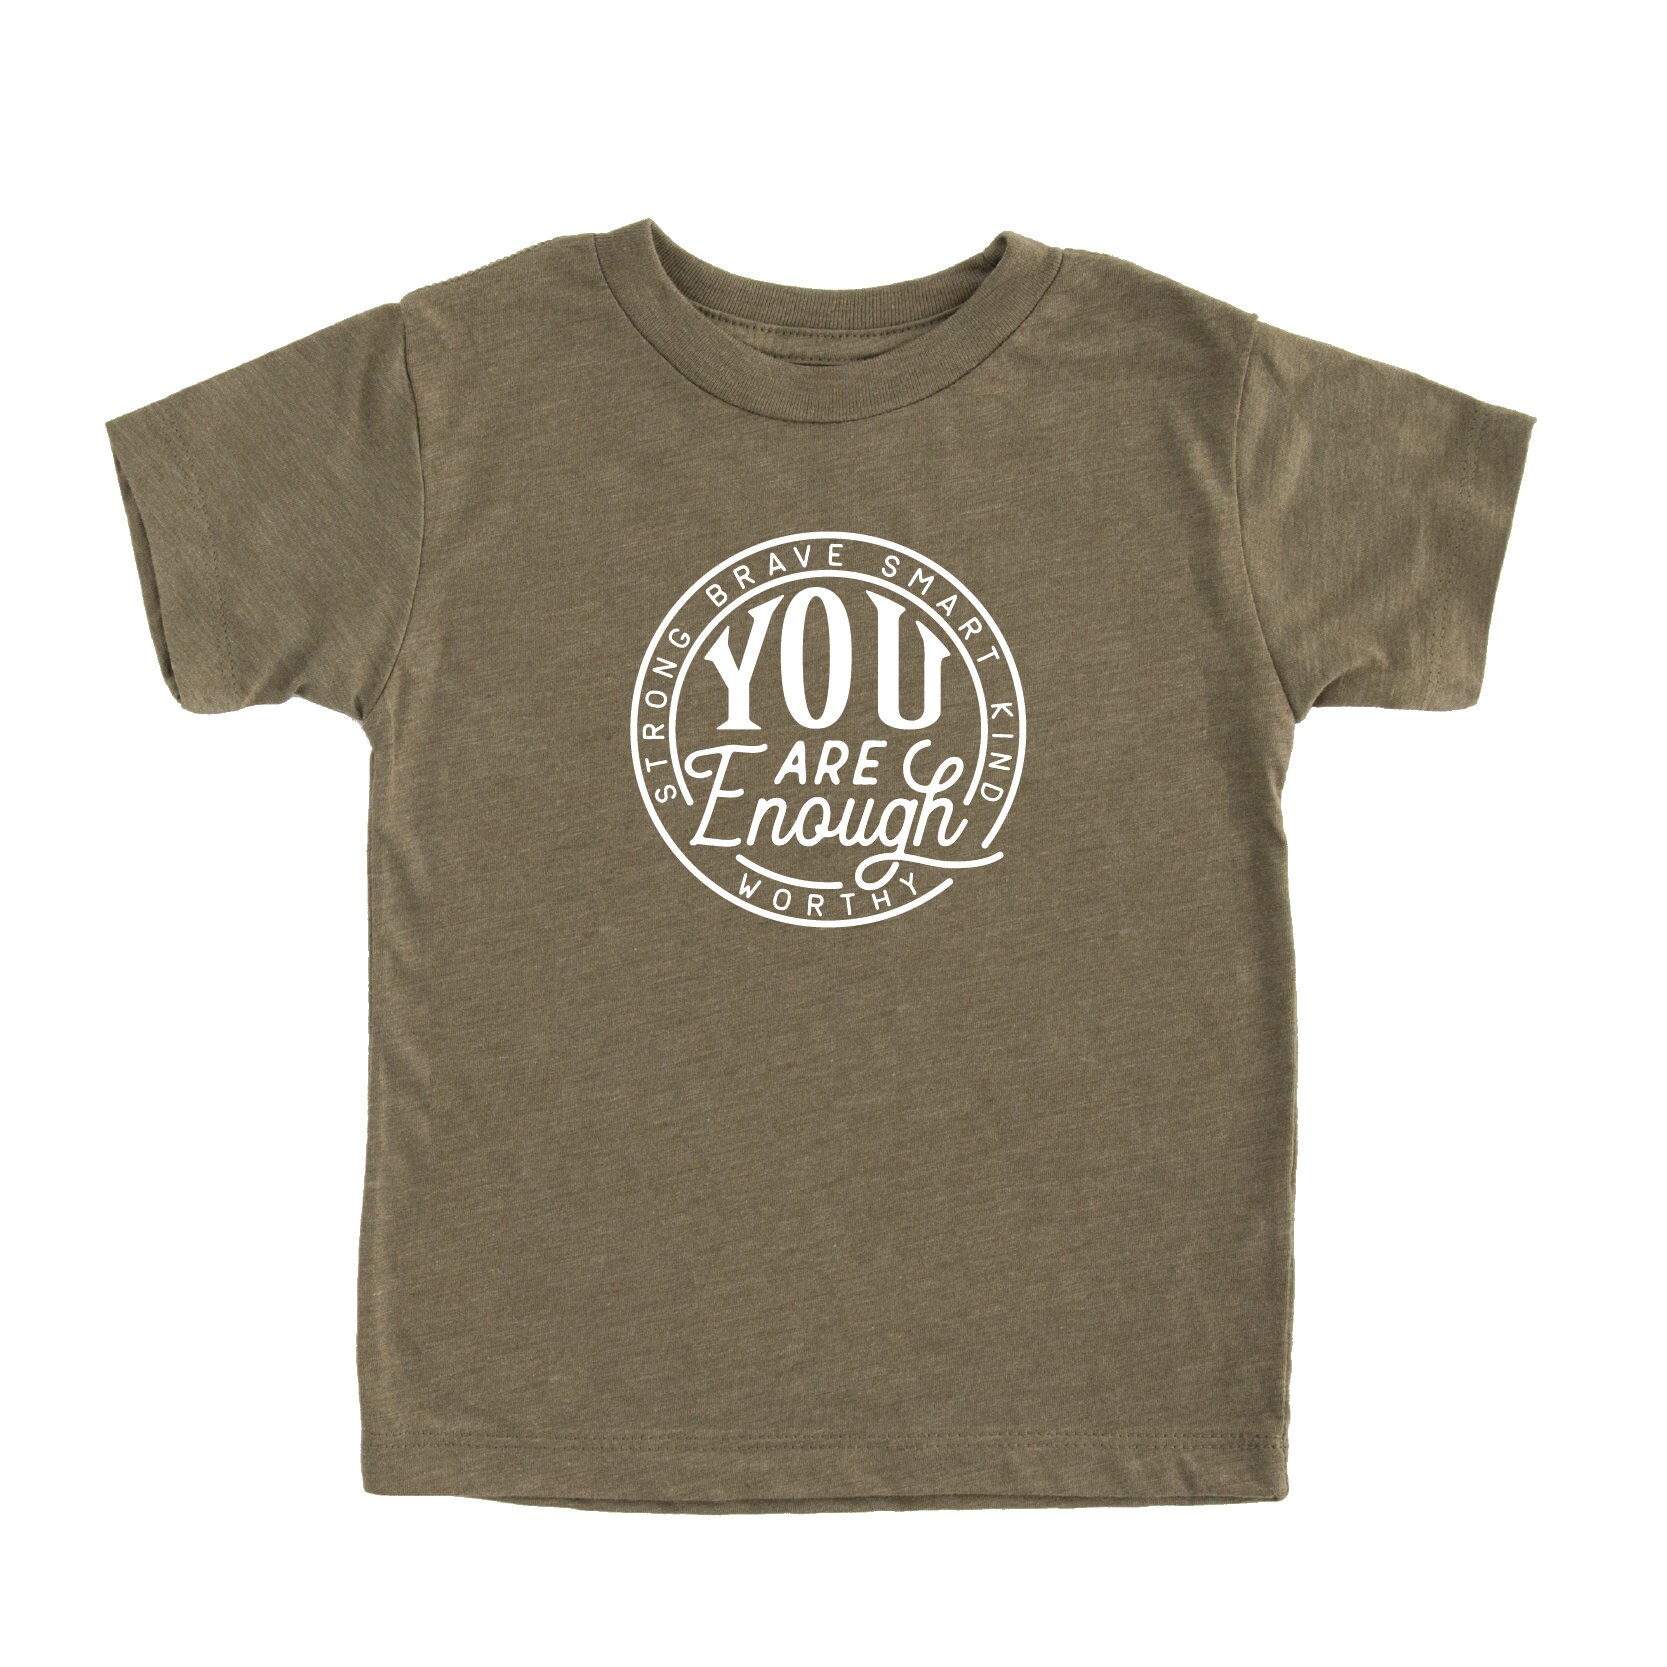 You Are Enough Kids Shirt by Nature Supply Co | Etsy